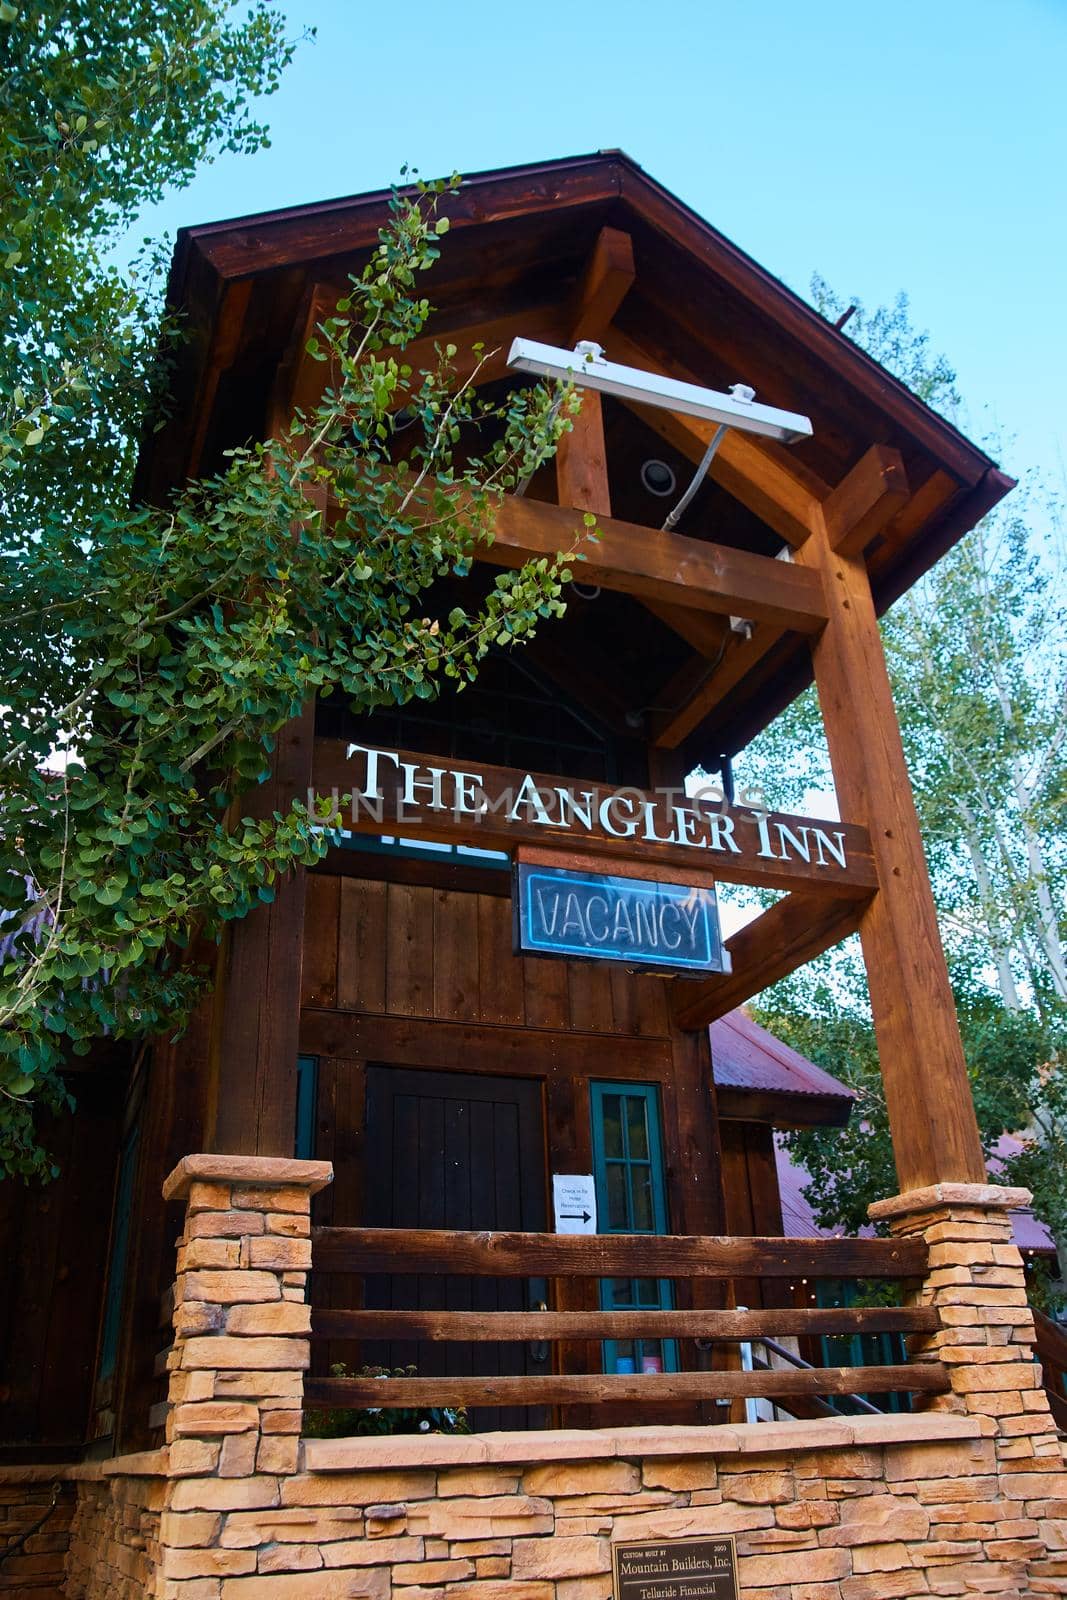 Image of The Angler Inn hotel log cabin in the mountains